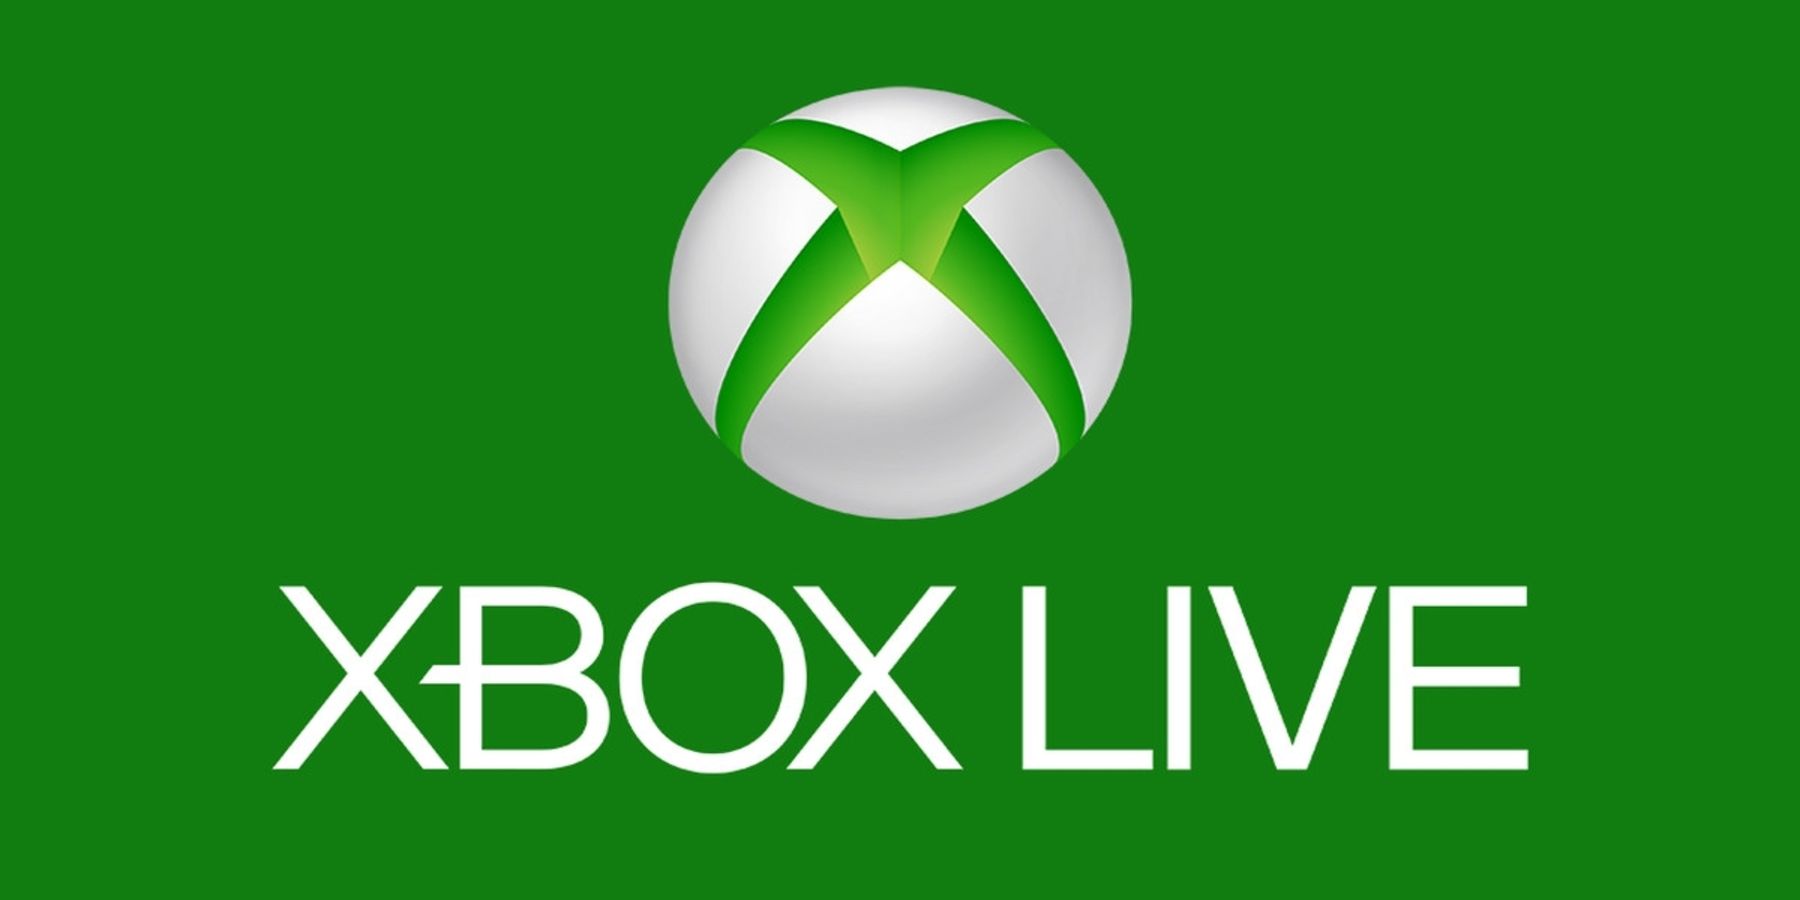 xbox-live-logo-and-text